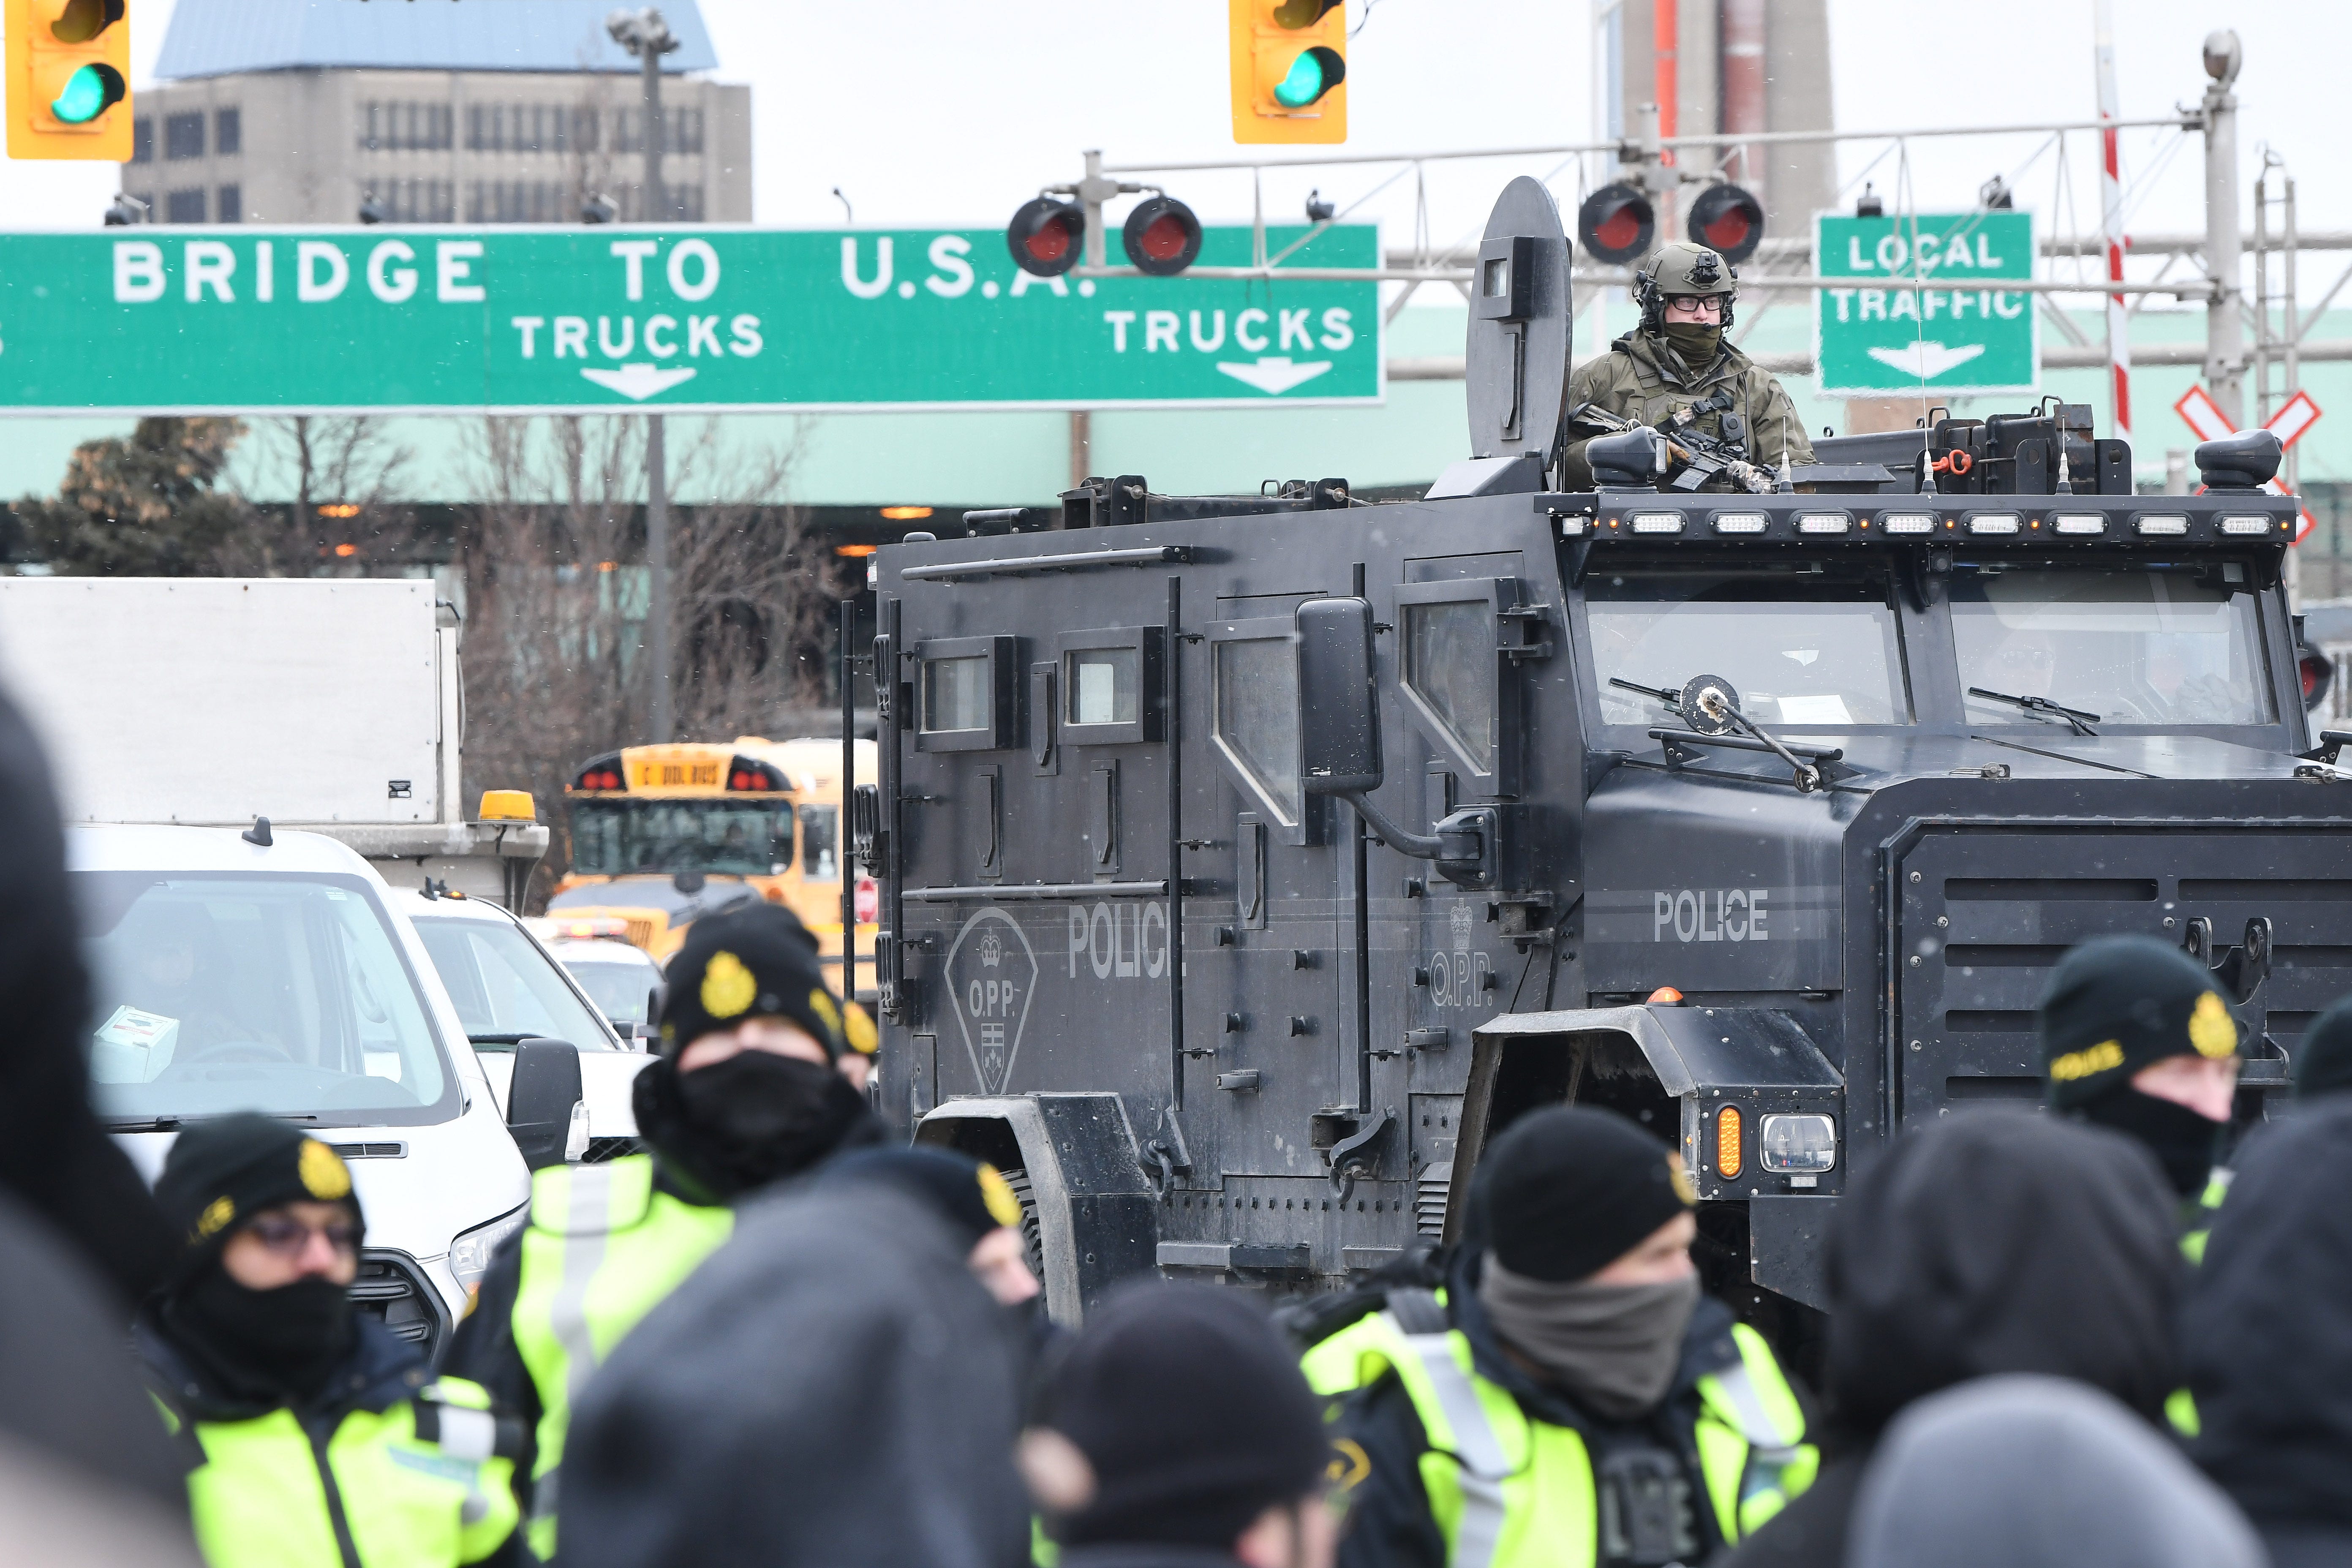 An armored vehicle slowly follows law enforcement officers as they walk a line through protestors unhappy over Canada ' s COVID mandates, near the Ambassador Bridge in Windsor, Canada, on February 12, 2022.